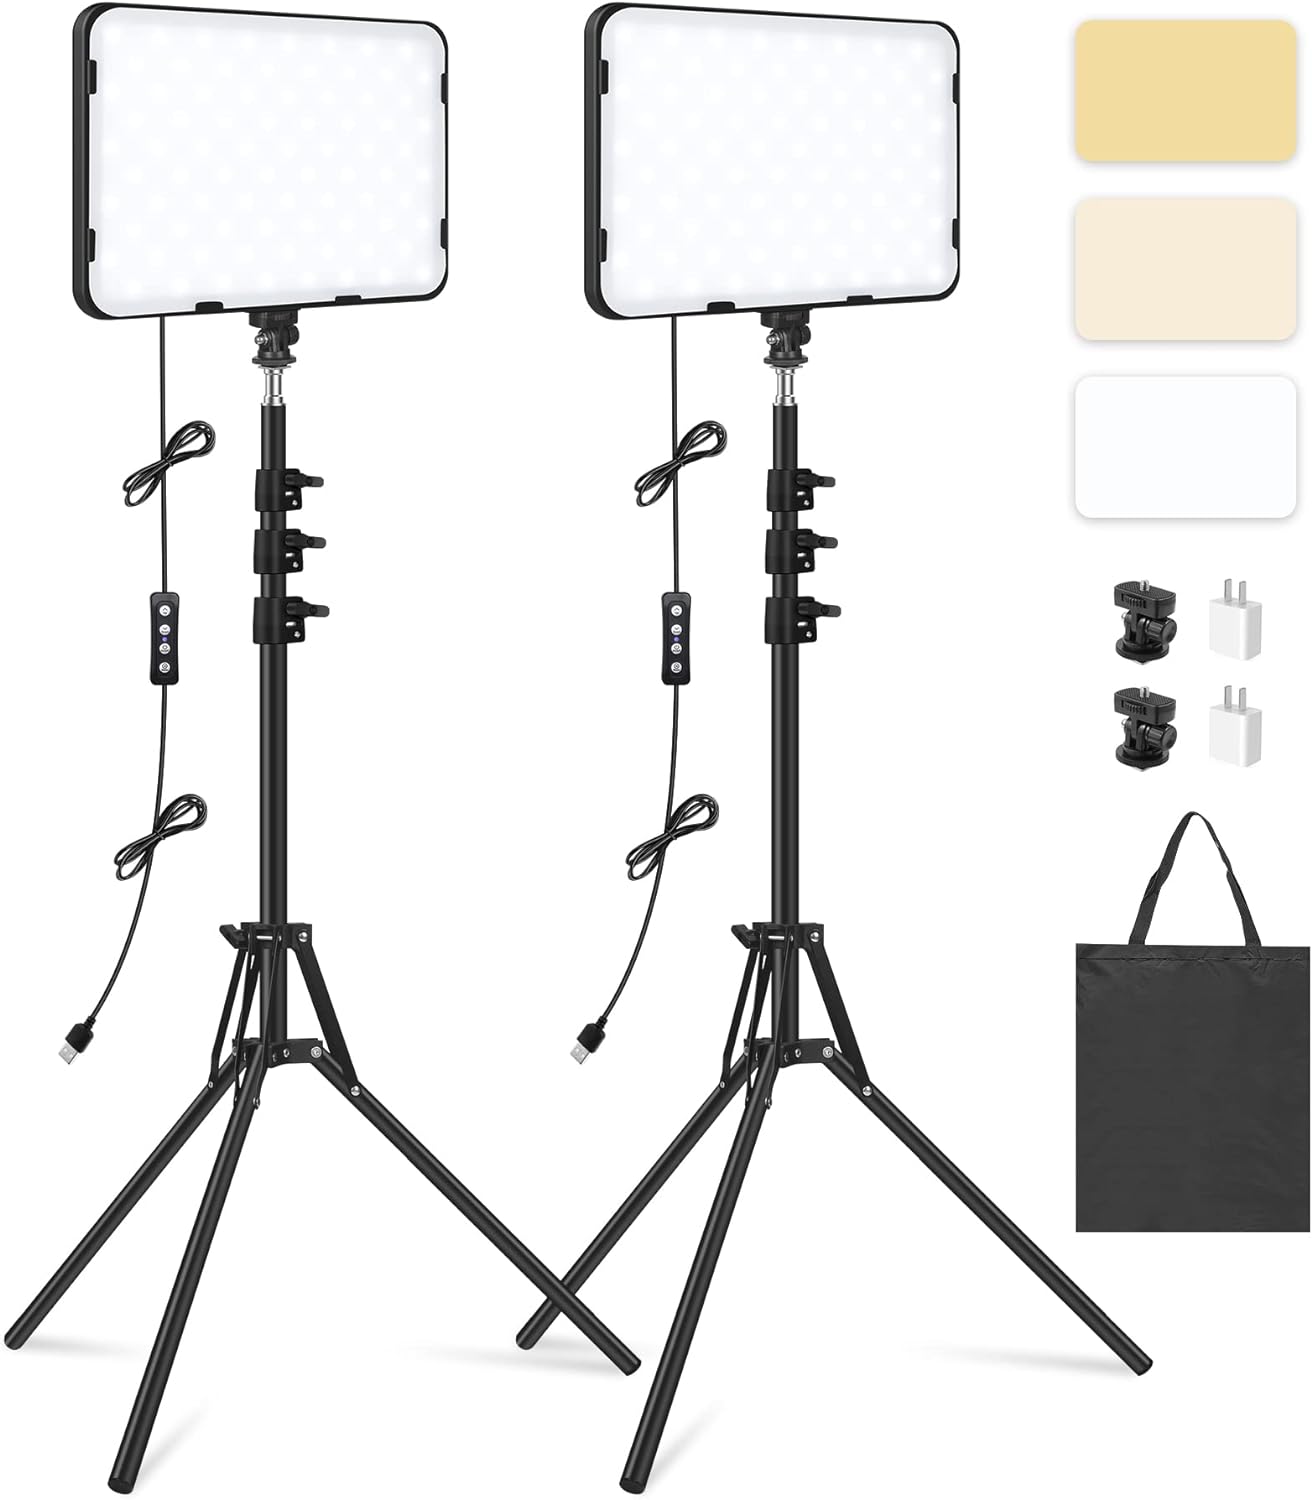 2 Pack LED Video Light with 63 Tripod Stand, Obeamiu 2500-8500K Dimmable Photography Studio Lighting for Video Film Recording/Collection Portrait/Live Game Streaming/YouTube Podcast, USB Charger